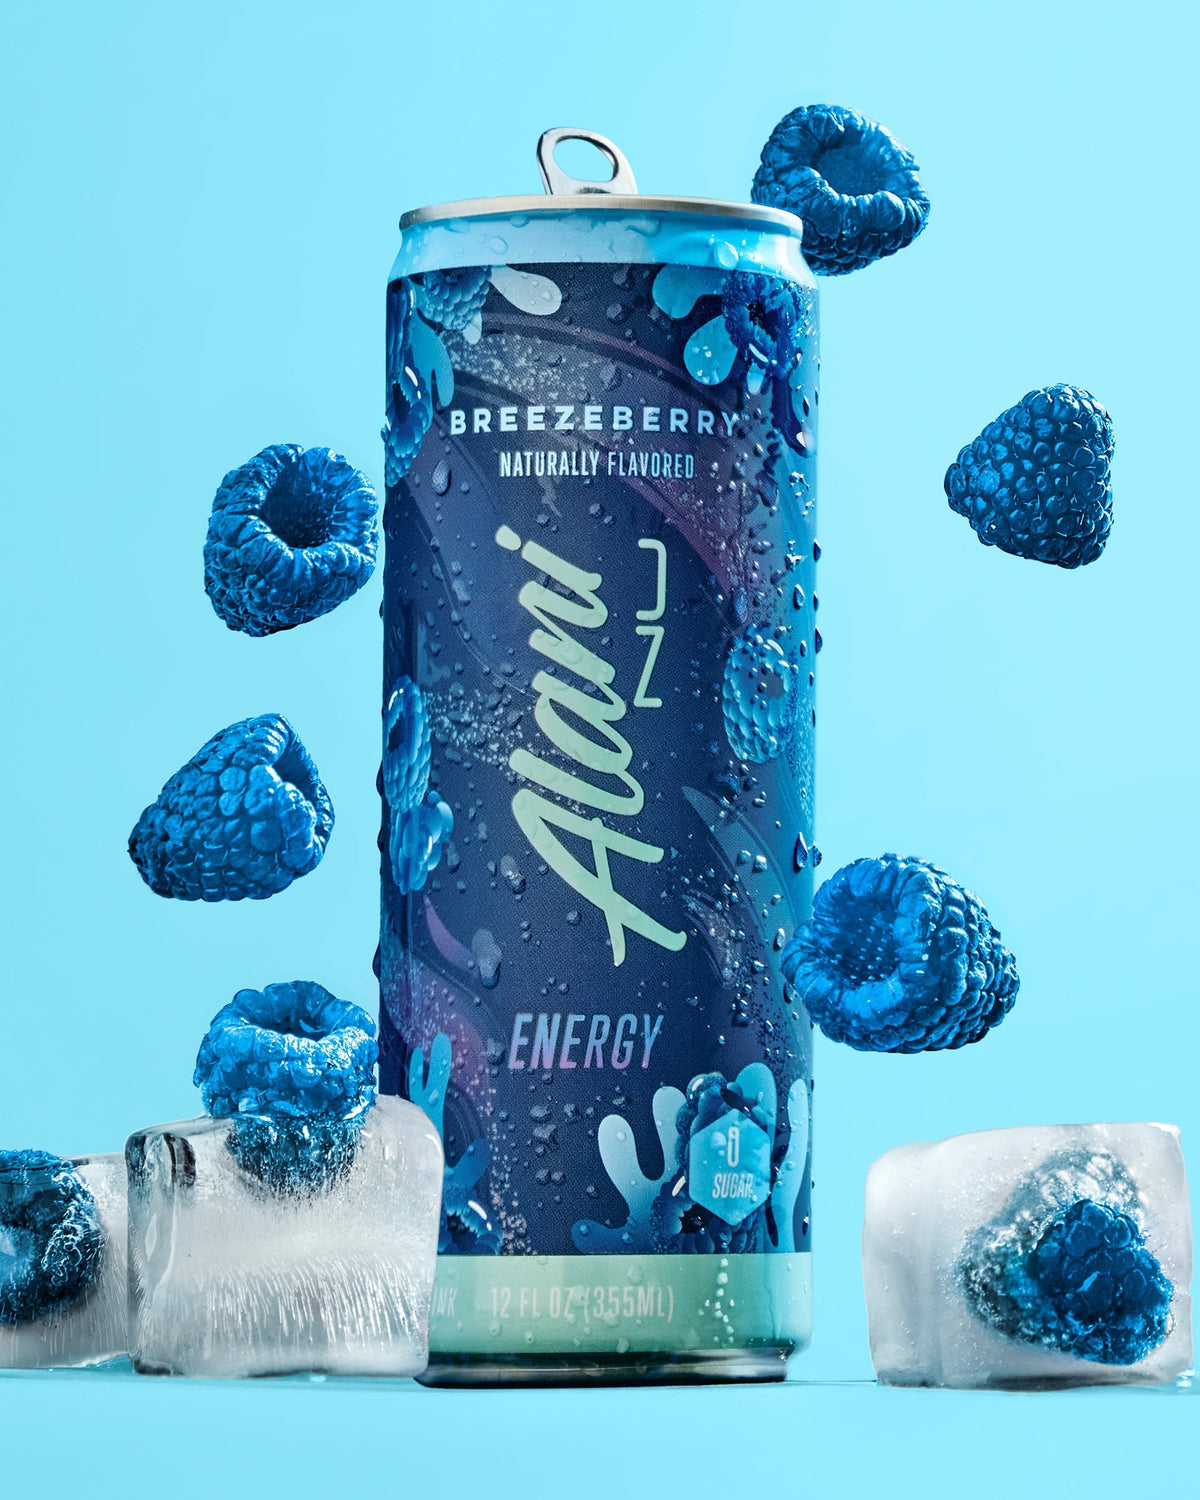 Energy Drink in Breezeberry flavor surrounded by ice cubes and blueberries.